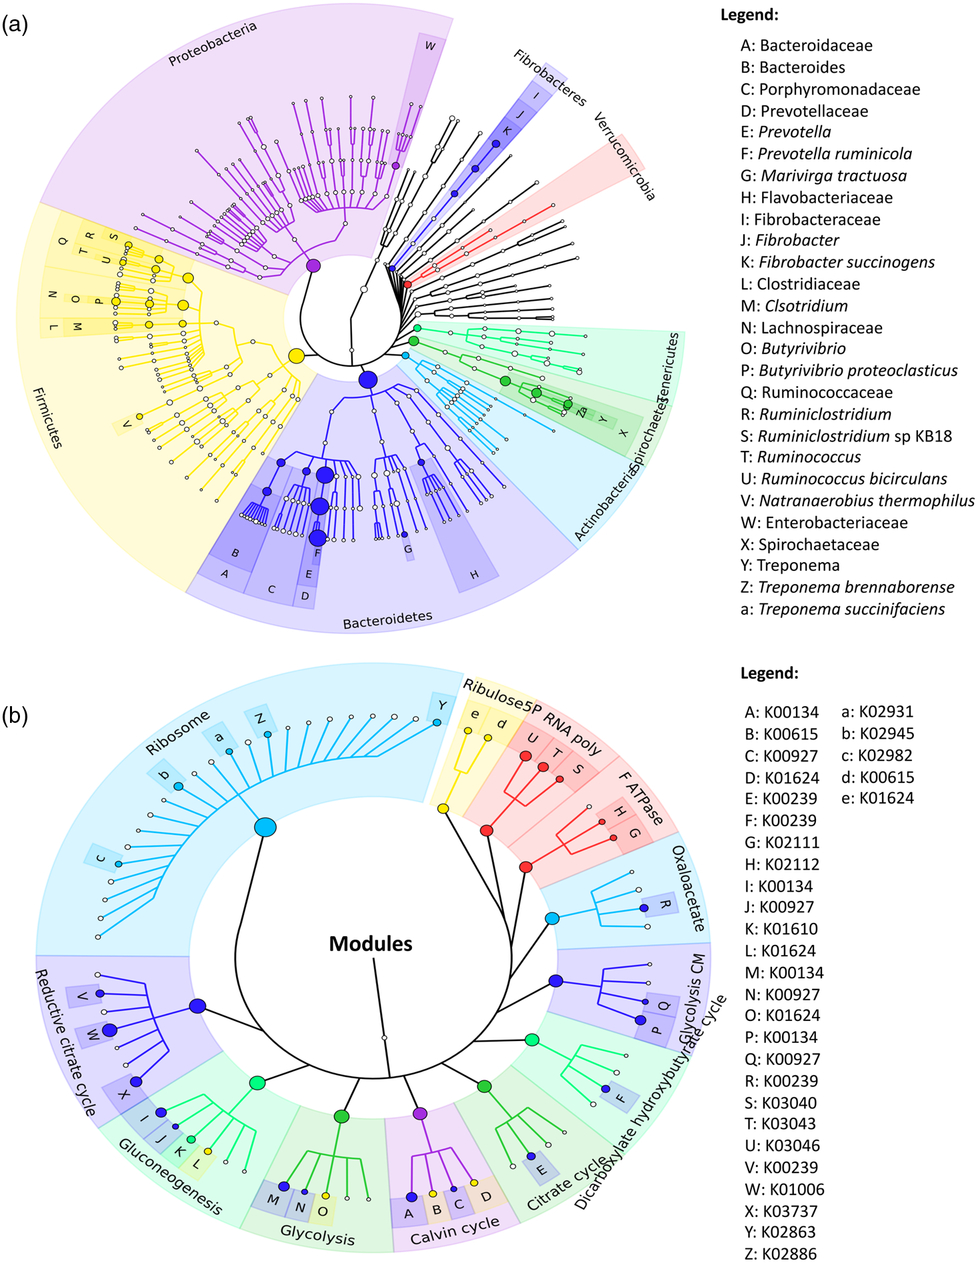 Taxonomic And Functional Assessment Using Metatranscriptomics Reveals The Effect Of Angus Cattle On Rumen Microbial Signatures Animal Cambridge Core